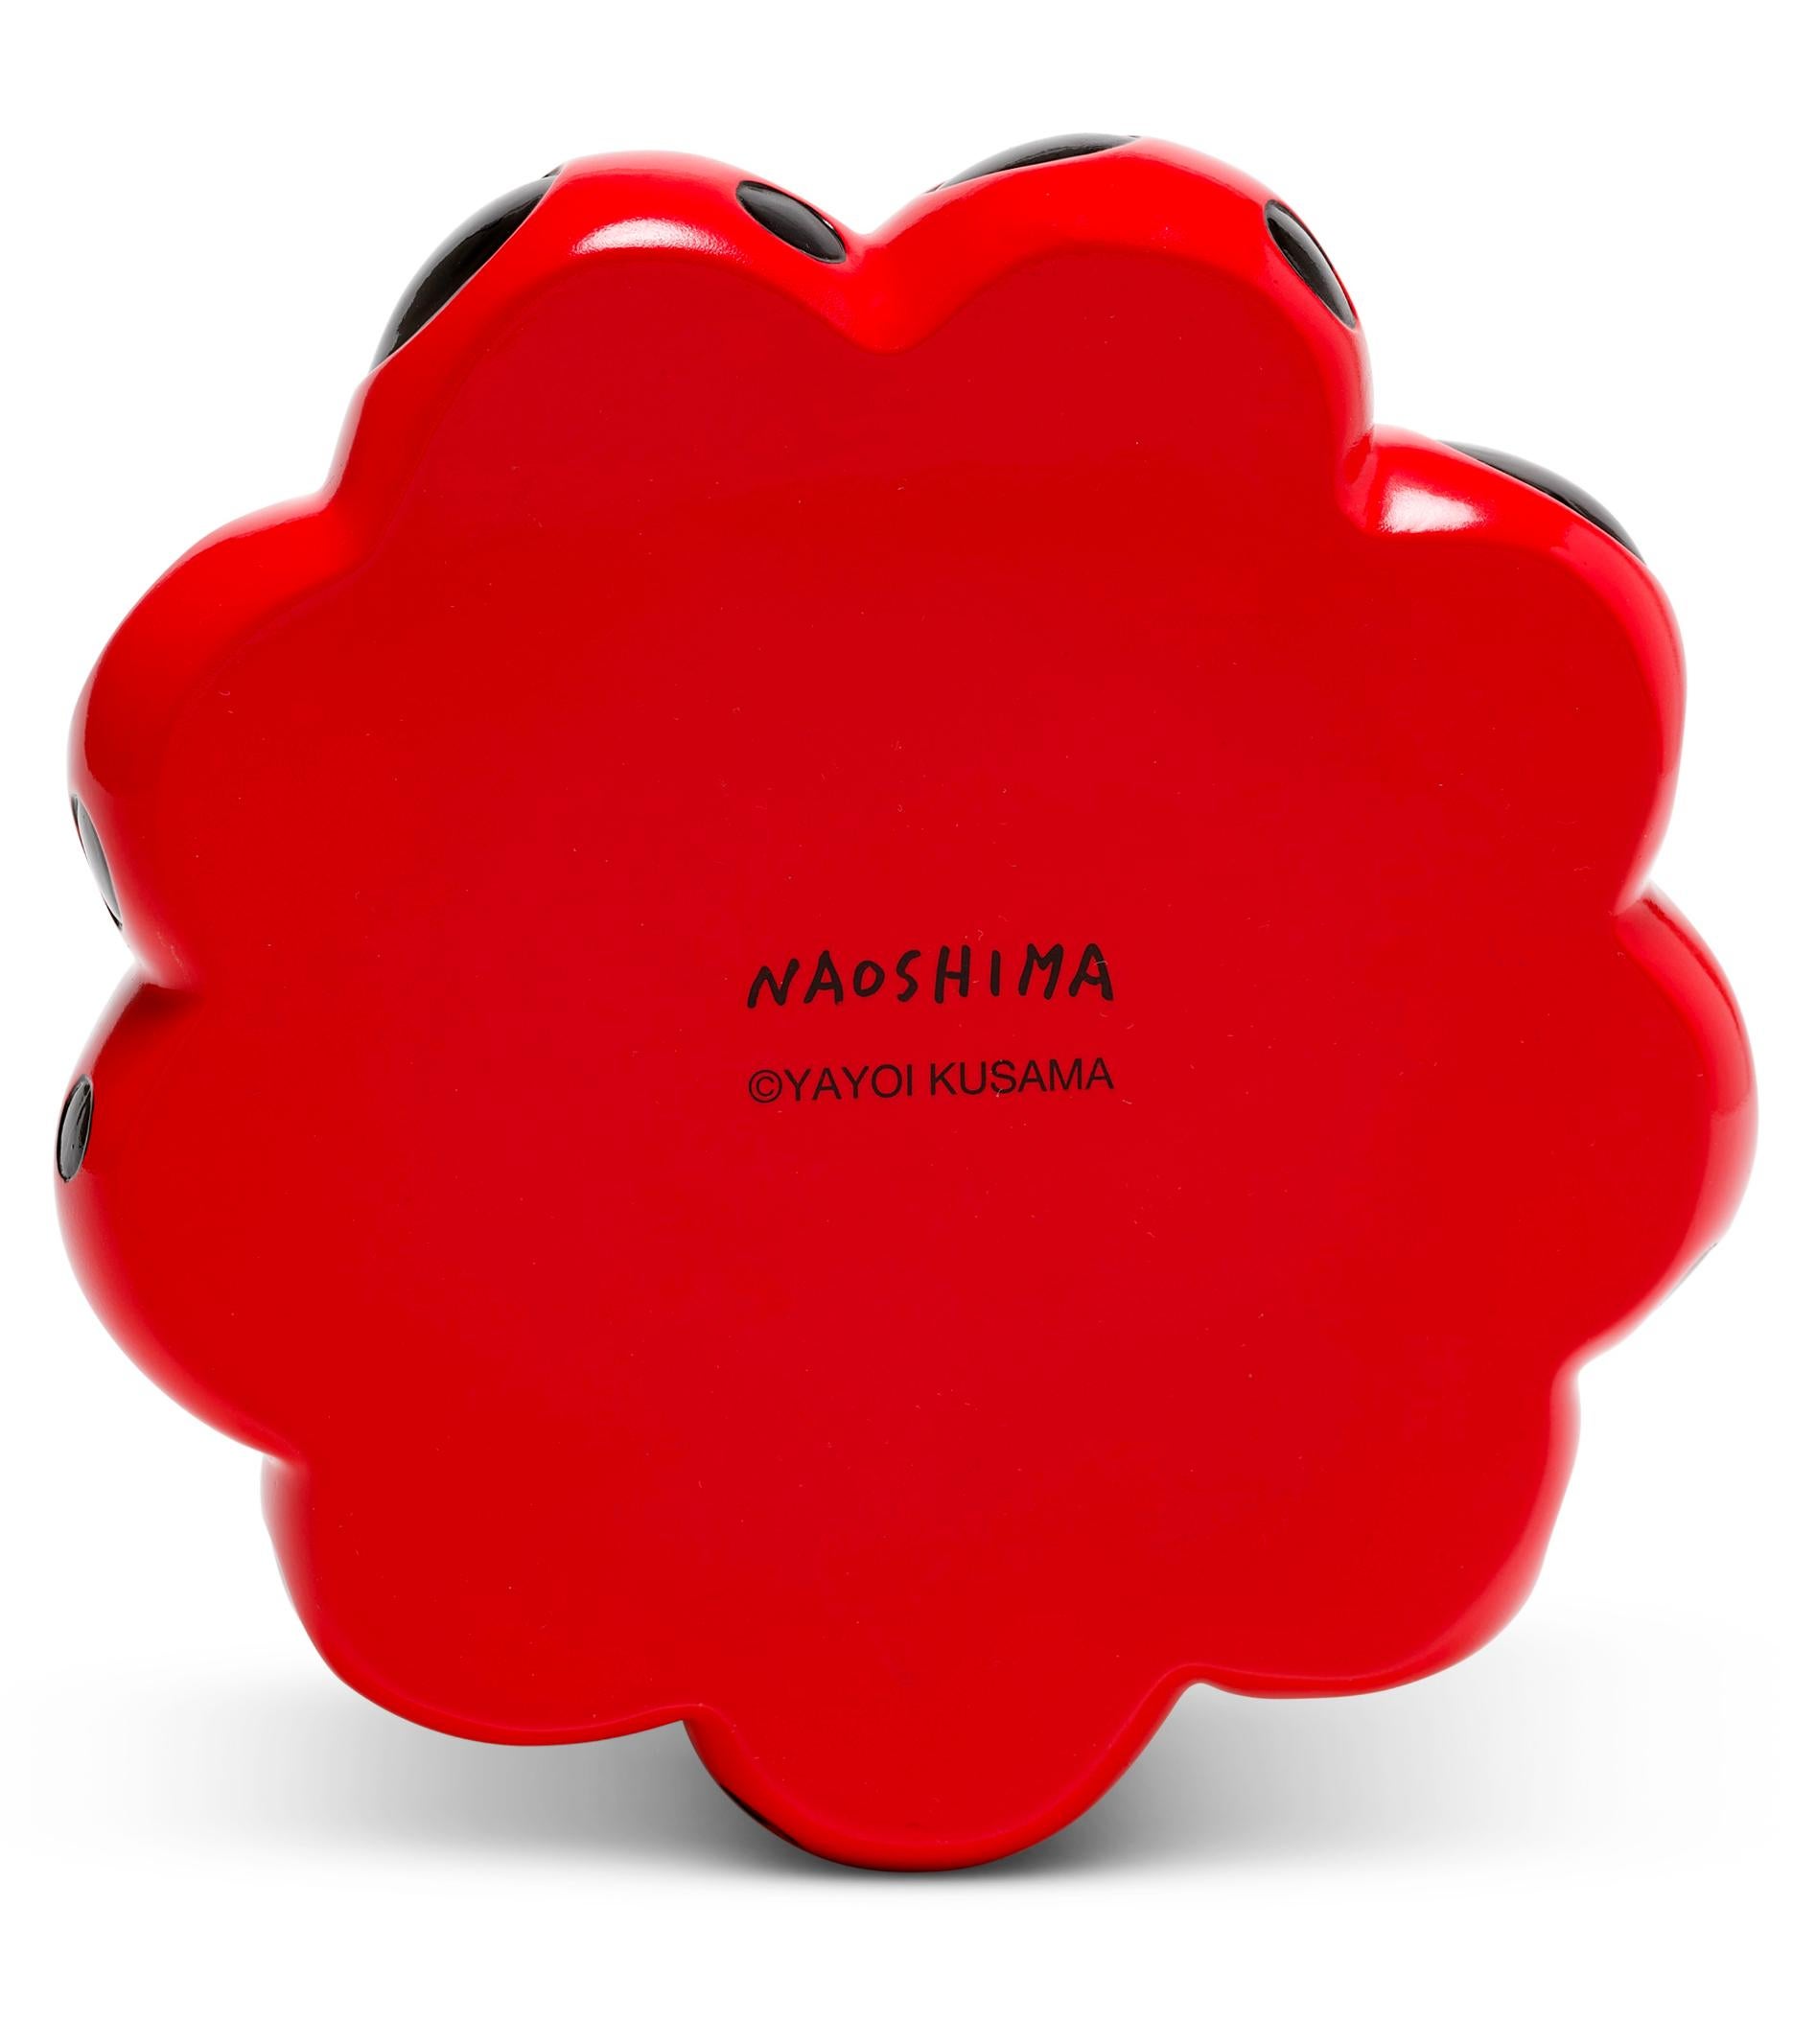 Yayoi Kusama Red & Black Pumpkin 2019:
An iconic, vibrantly colored pop art piece - this rare, sought-after red Kusama pumpkin sculpture features the universal polka dot patterns and bold colors for which the artist is perhaps best known. Kusama